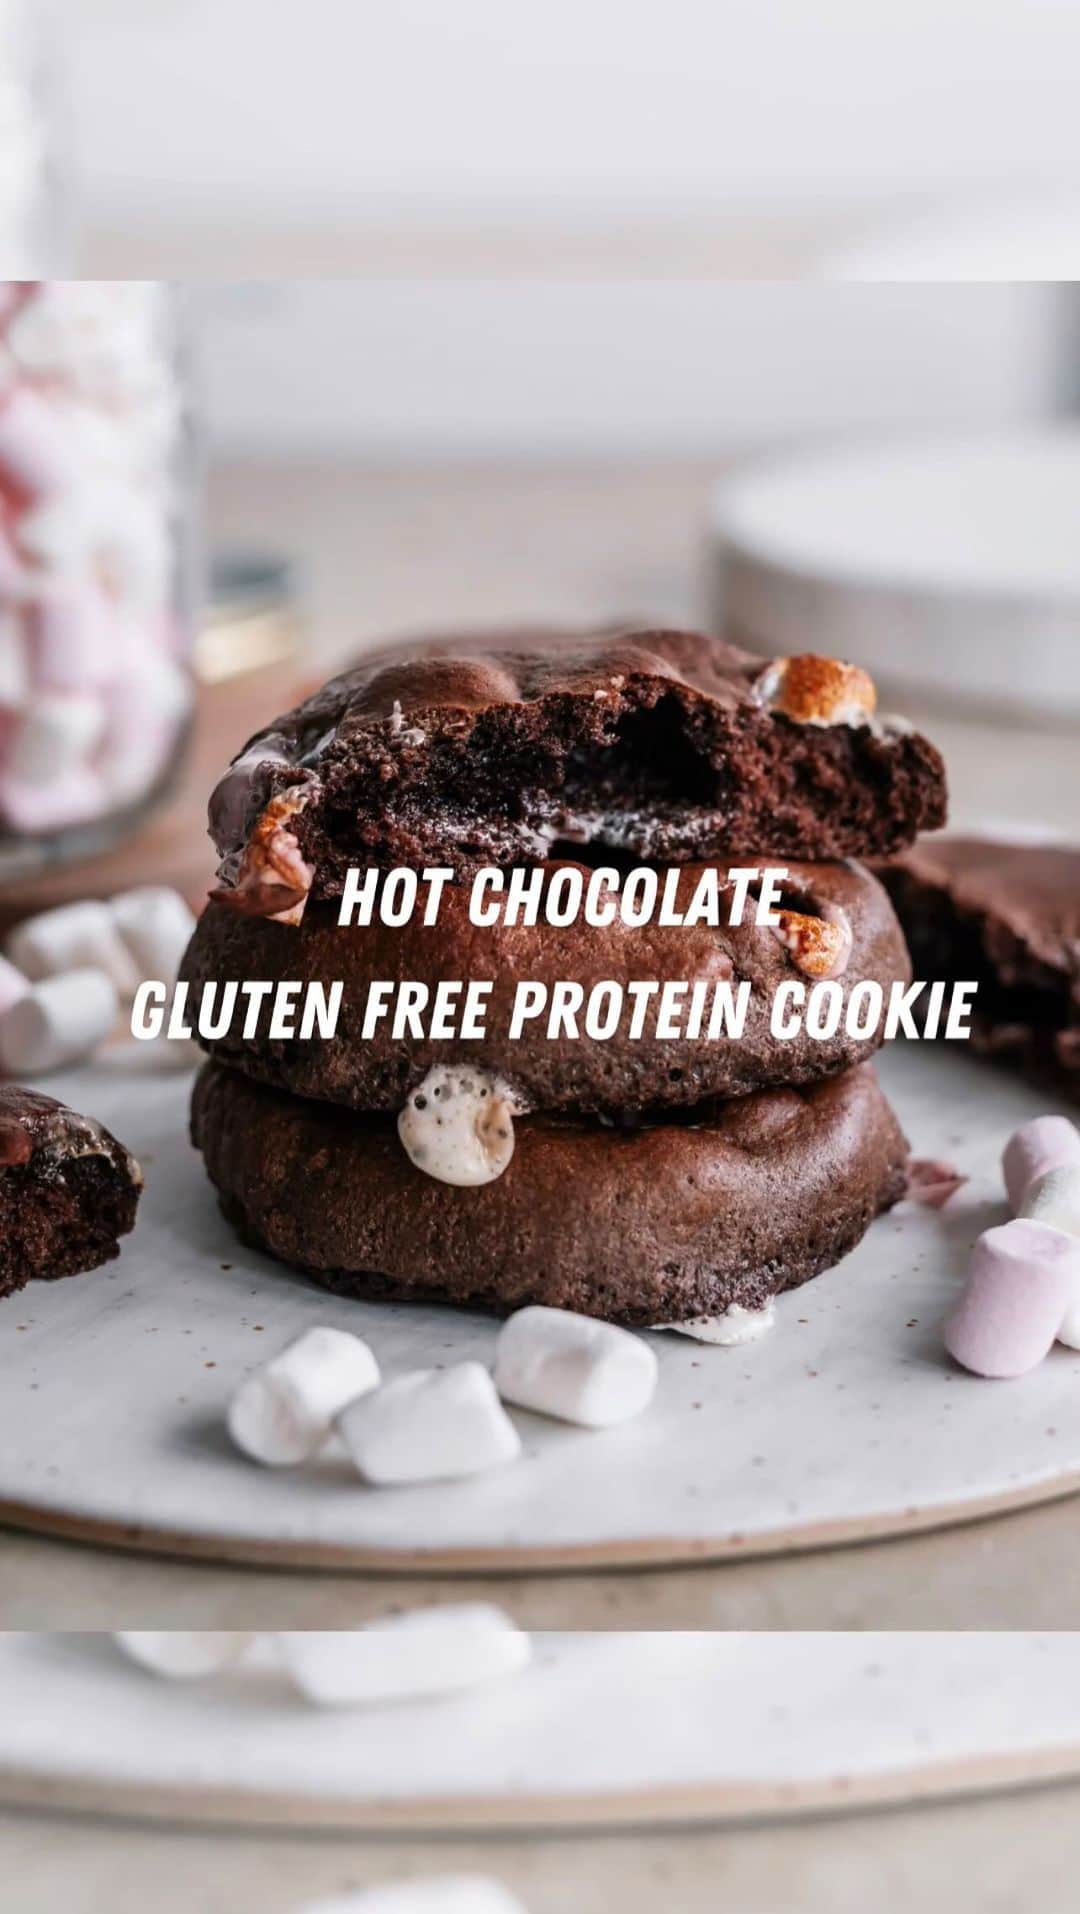 Camille Leblanc-Bazinetのインスタグラム：「🎄✨ Guilt-Free Holiday Bliss Awaits! 🍪📚  This holiday season, embrace joy and deliciousness without a hint of guilt! 🏋️‍♀️ As a pro athlete, I’ve unlocked the secret to holiday indulgence that won’t compromise your health goals.  Introducing our holiday cookbook 📖🍽️, featuring a dozen ✅high-protein, ✅gluten-free, and ✅keto-friendly cookie recipes that will dazzle your taste buds:  1. Spiced Gingerbread 2. Aunt Josee’s PB Kisses Cookie 3. White Chocolate Chip Cranberry 4. Almond Raspberry Thumbprint 5. Zebra Striped Shortbread 6. Pumpkin Spice Cream Cheese 7. Mexican Wedding Cookies 8. Rainbow 9. Red Velvet 10. Nostalgic Apple Pie Cookie 11. Festive Candy Cane 12. Hot Chocolate ☕🍪  For just $24.99, it’s your golden ticket to savoring the season while keeping your health on track. 🌟 Don’t let this opportunity slip away—order your cookbook now and relish the holidays the guilt-free way! 🎁✨ #HealthyHolidays #GuiltFreeIndulgence #HolidayCookbook #HighProteinTreats」